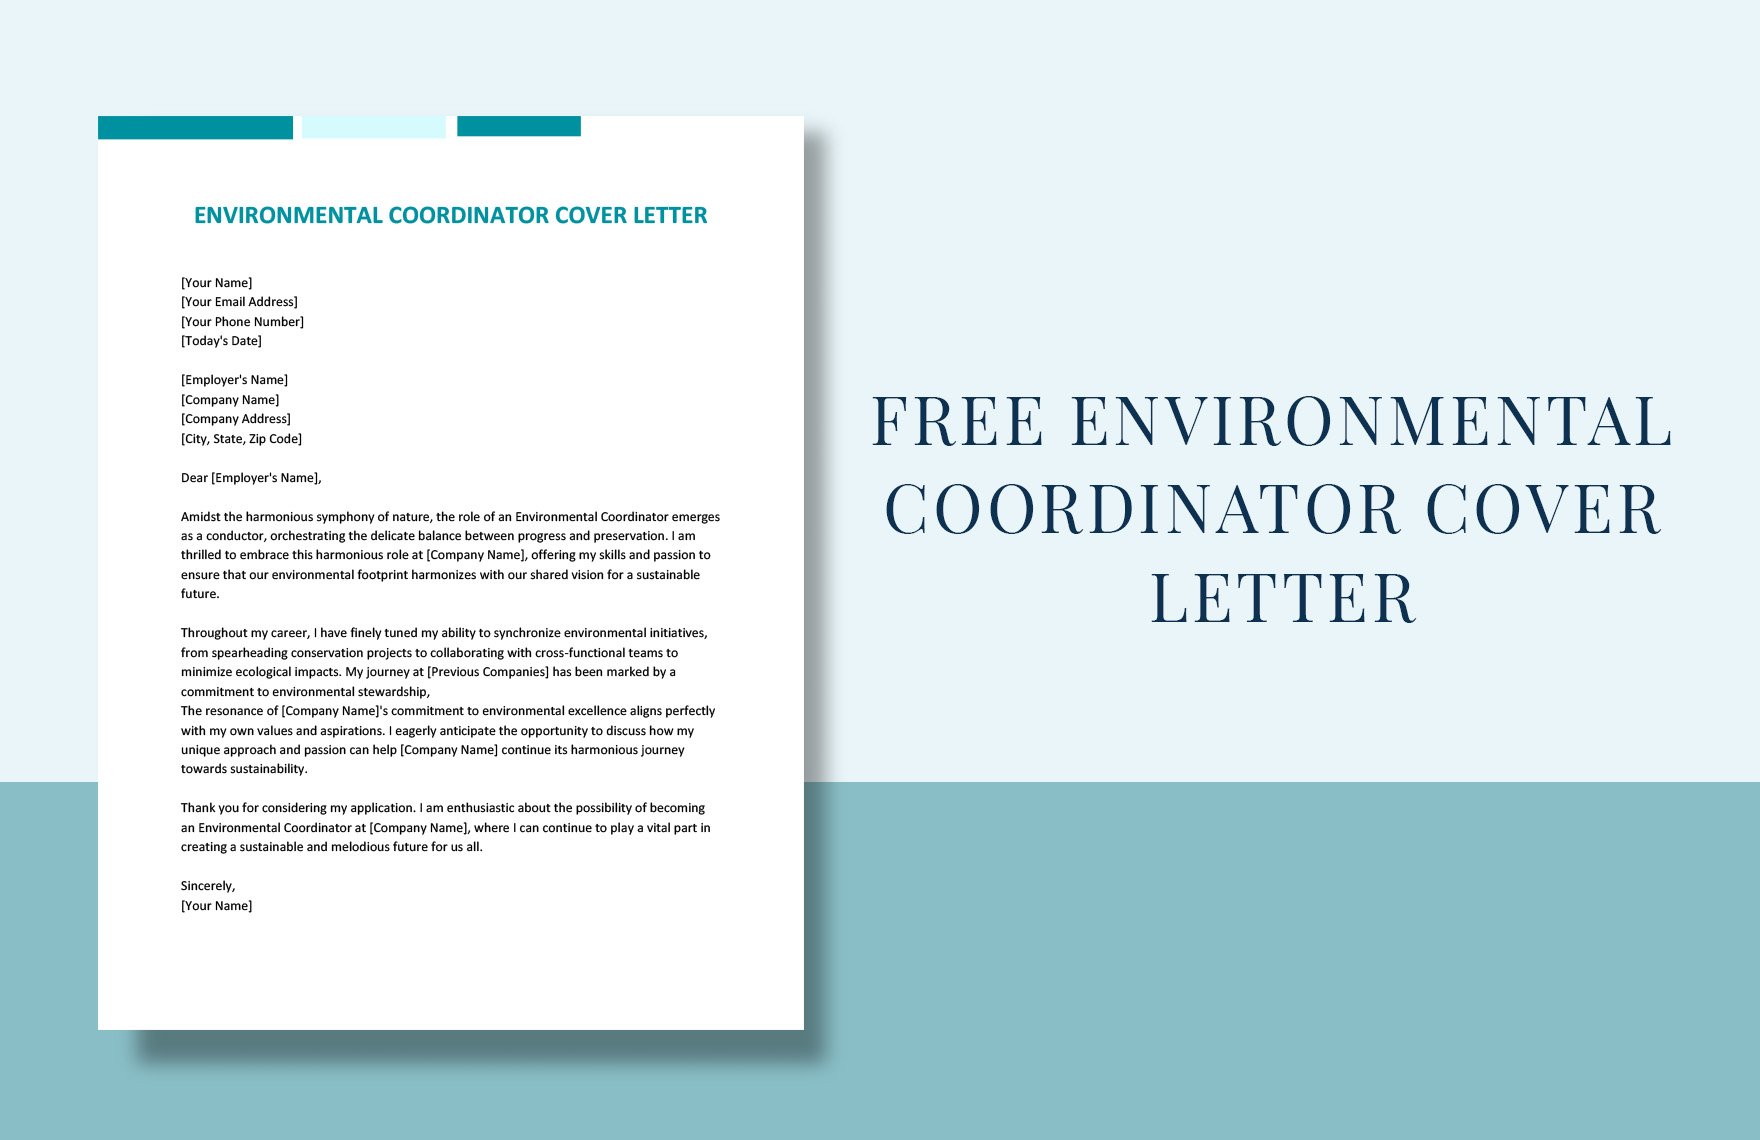 Environmental Coordinator Cover Letter in Word, Google Docs